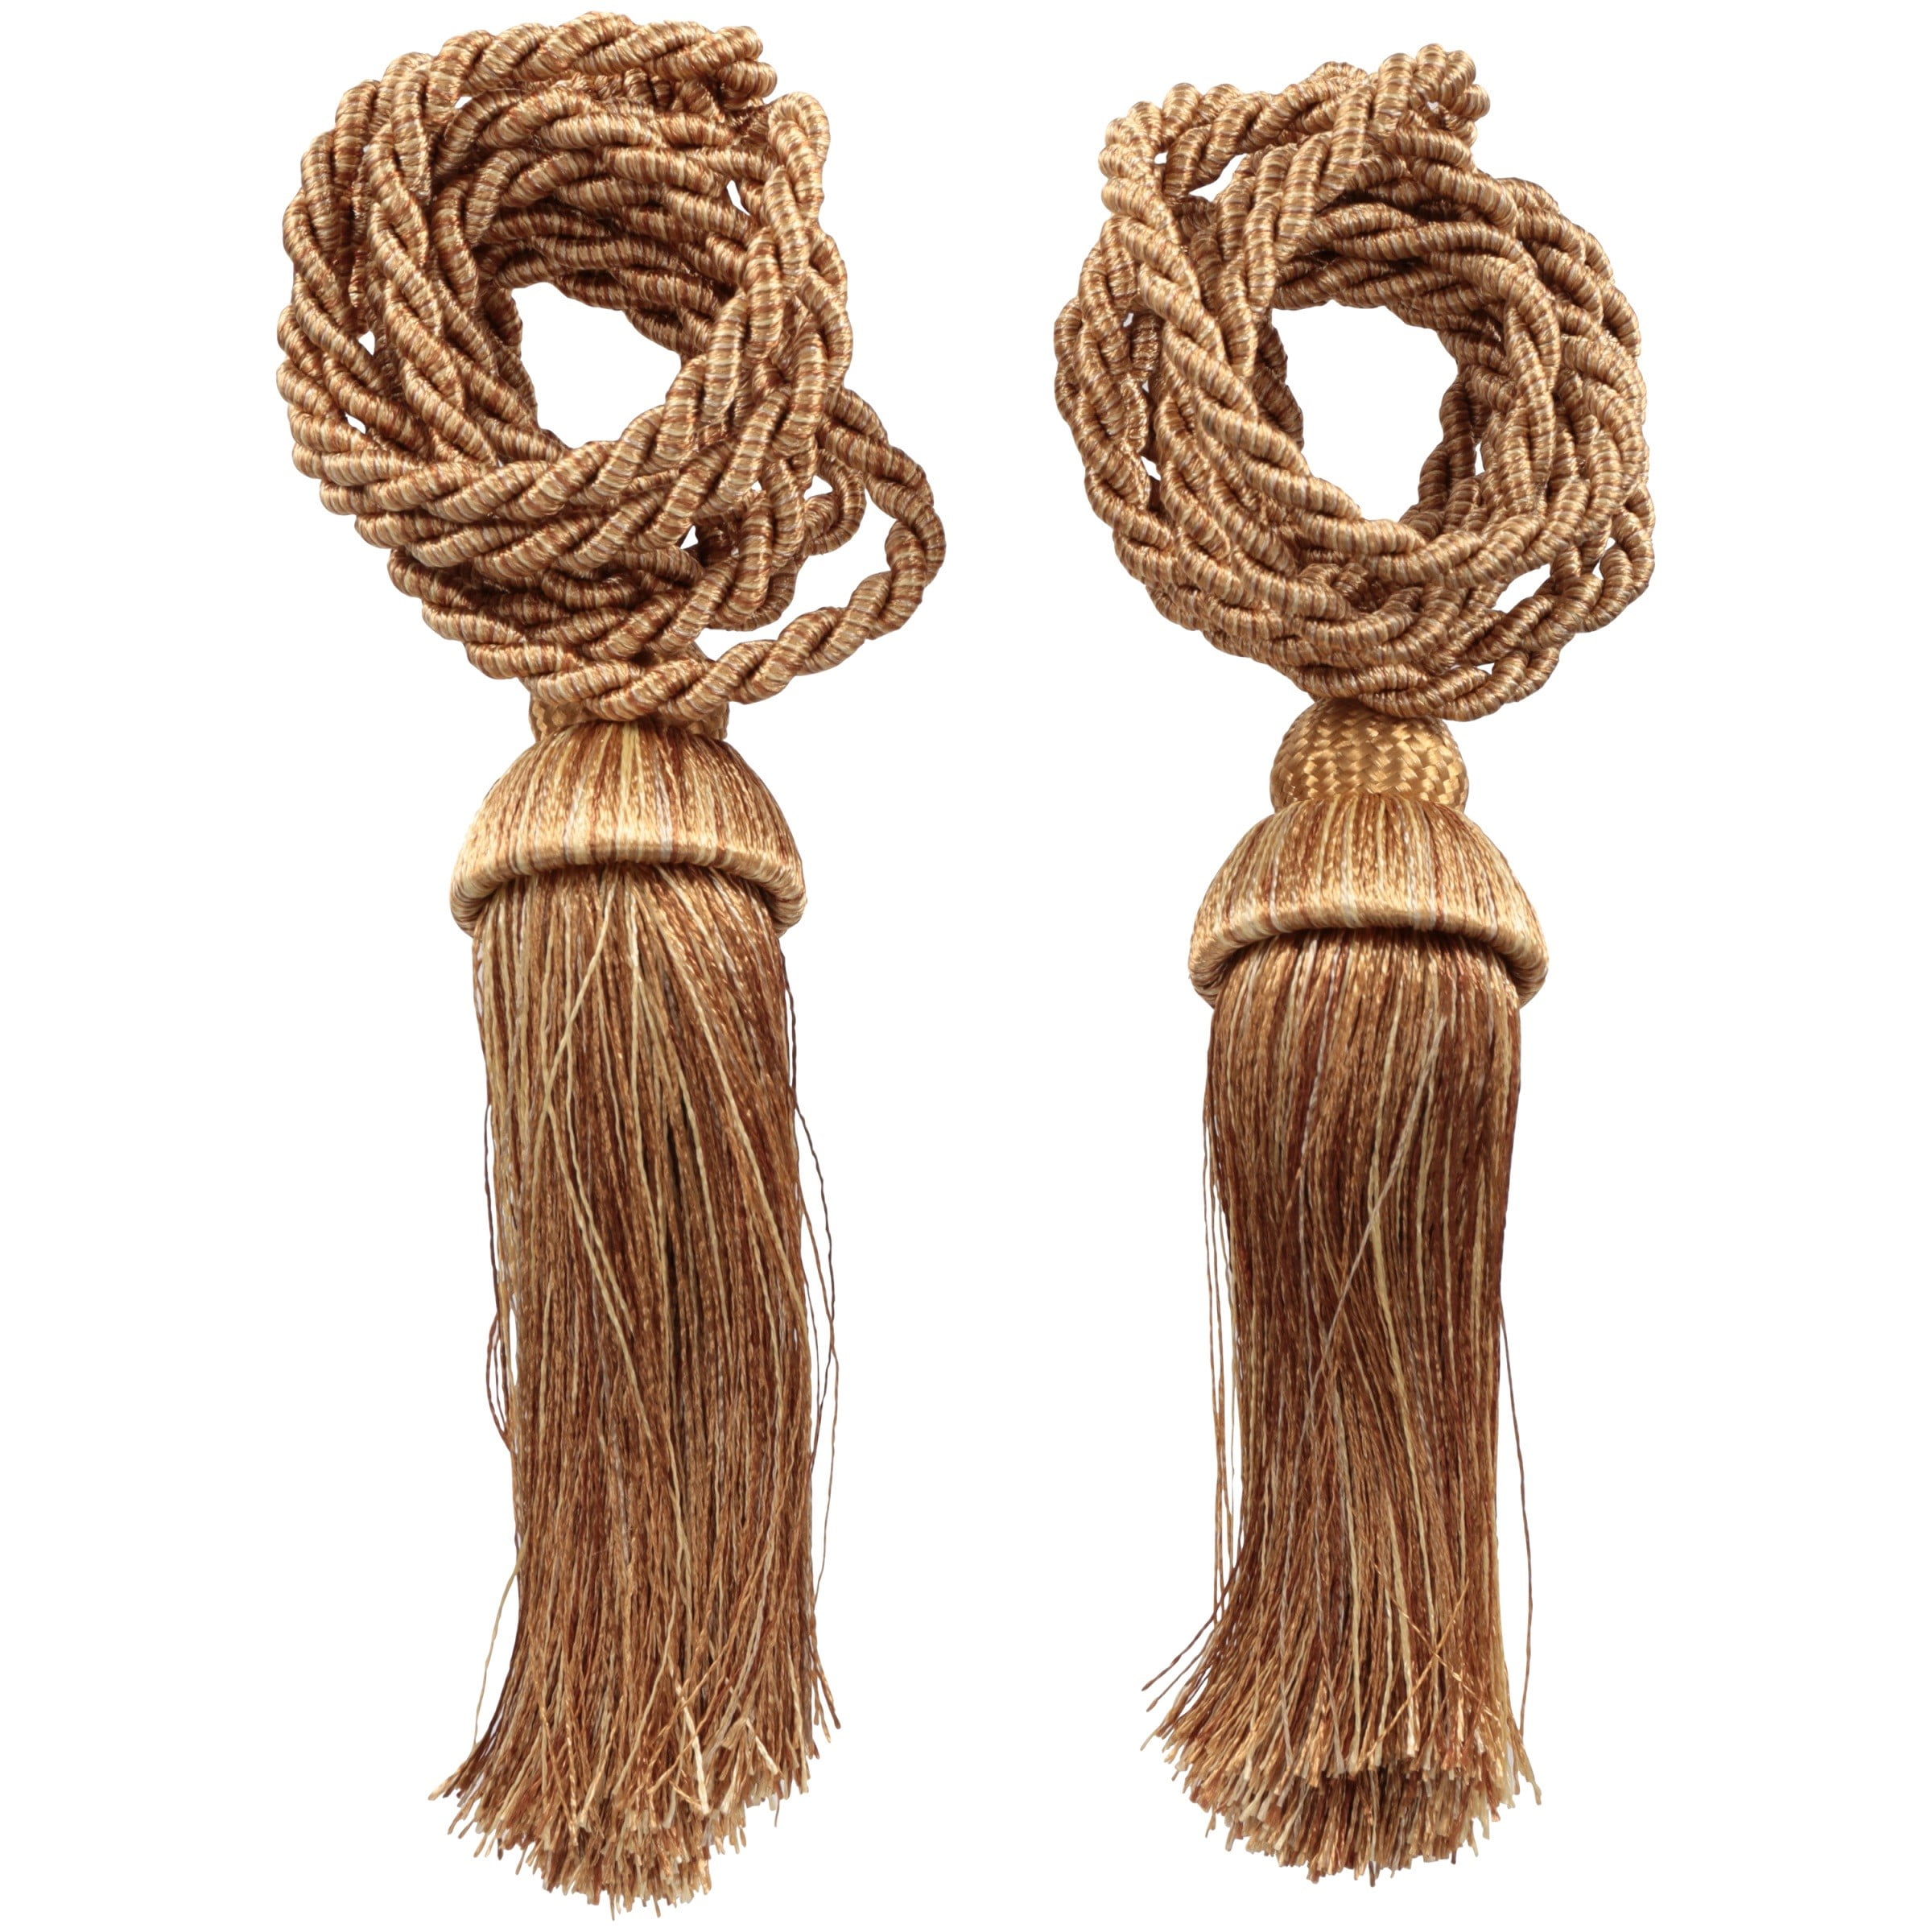 Tassel Tiebacks with Mini Tassels and Details Brown/Gold Tassel Tieback  with Mini Tassels and Details [TR7954] - $8.95 : Buy Cheap & Discount  Fashion Fabric Online